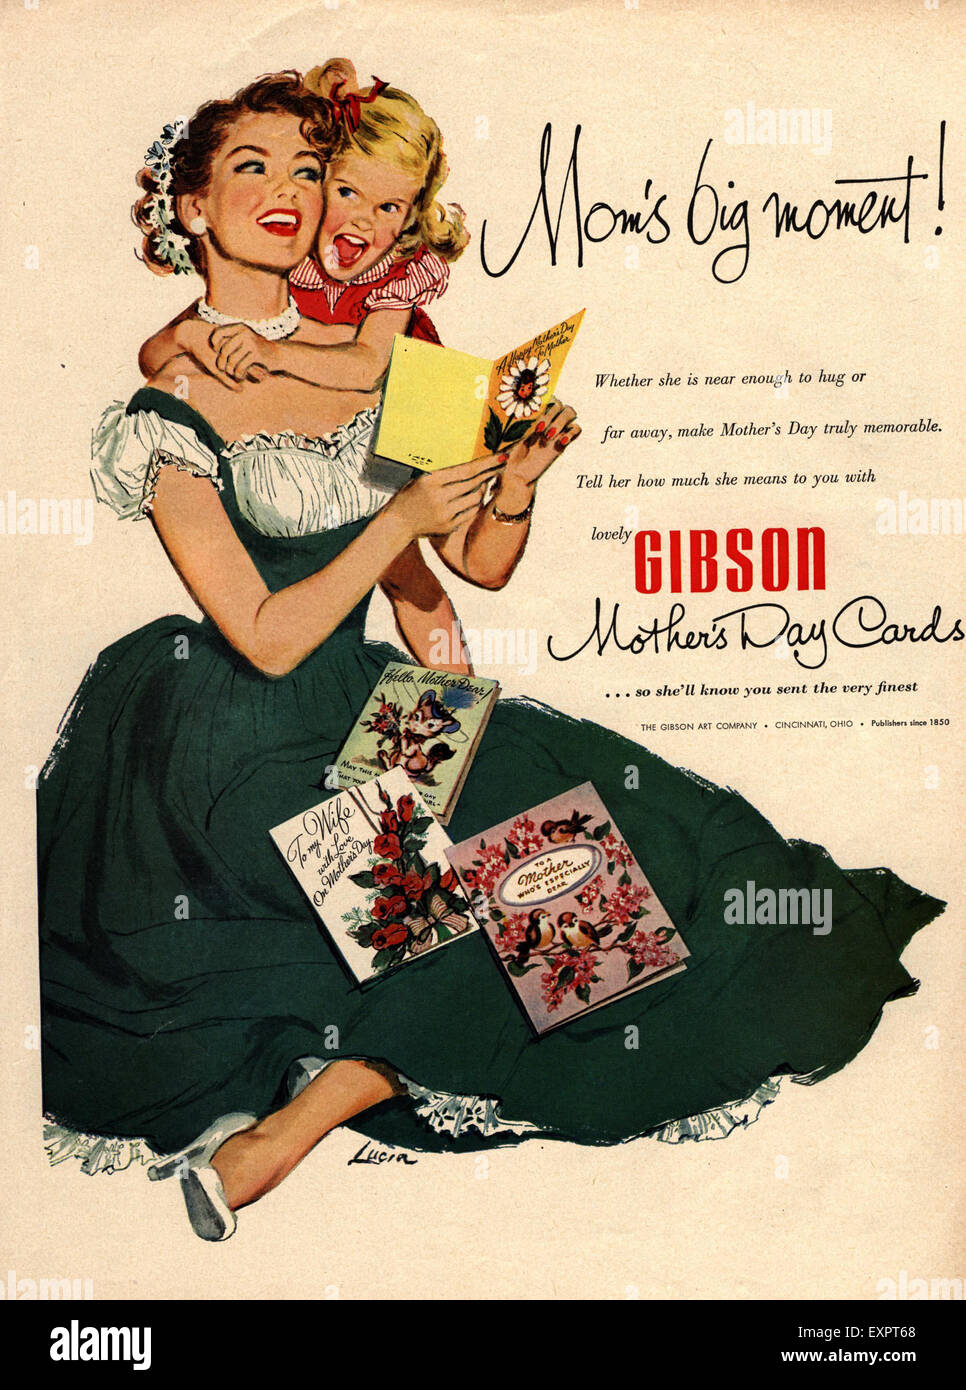 Download this stock image: 1940s USA Gibson Mother's Day Magazine ...